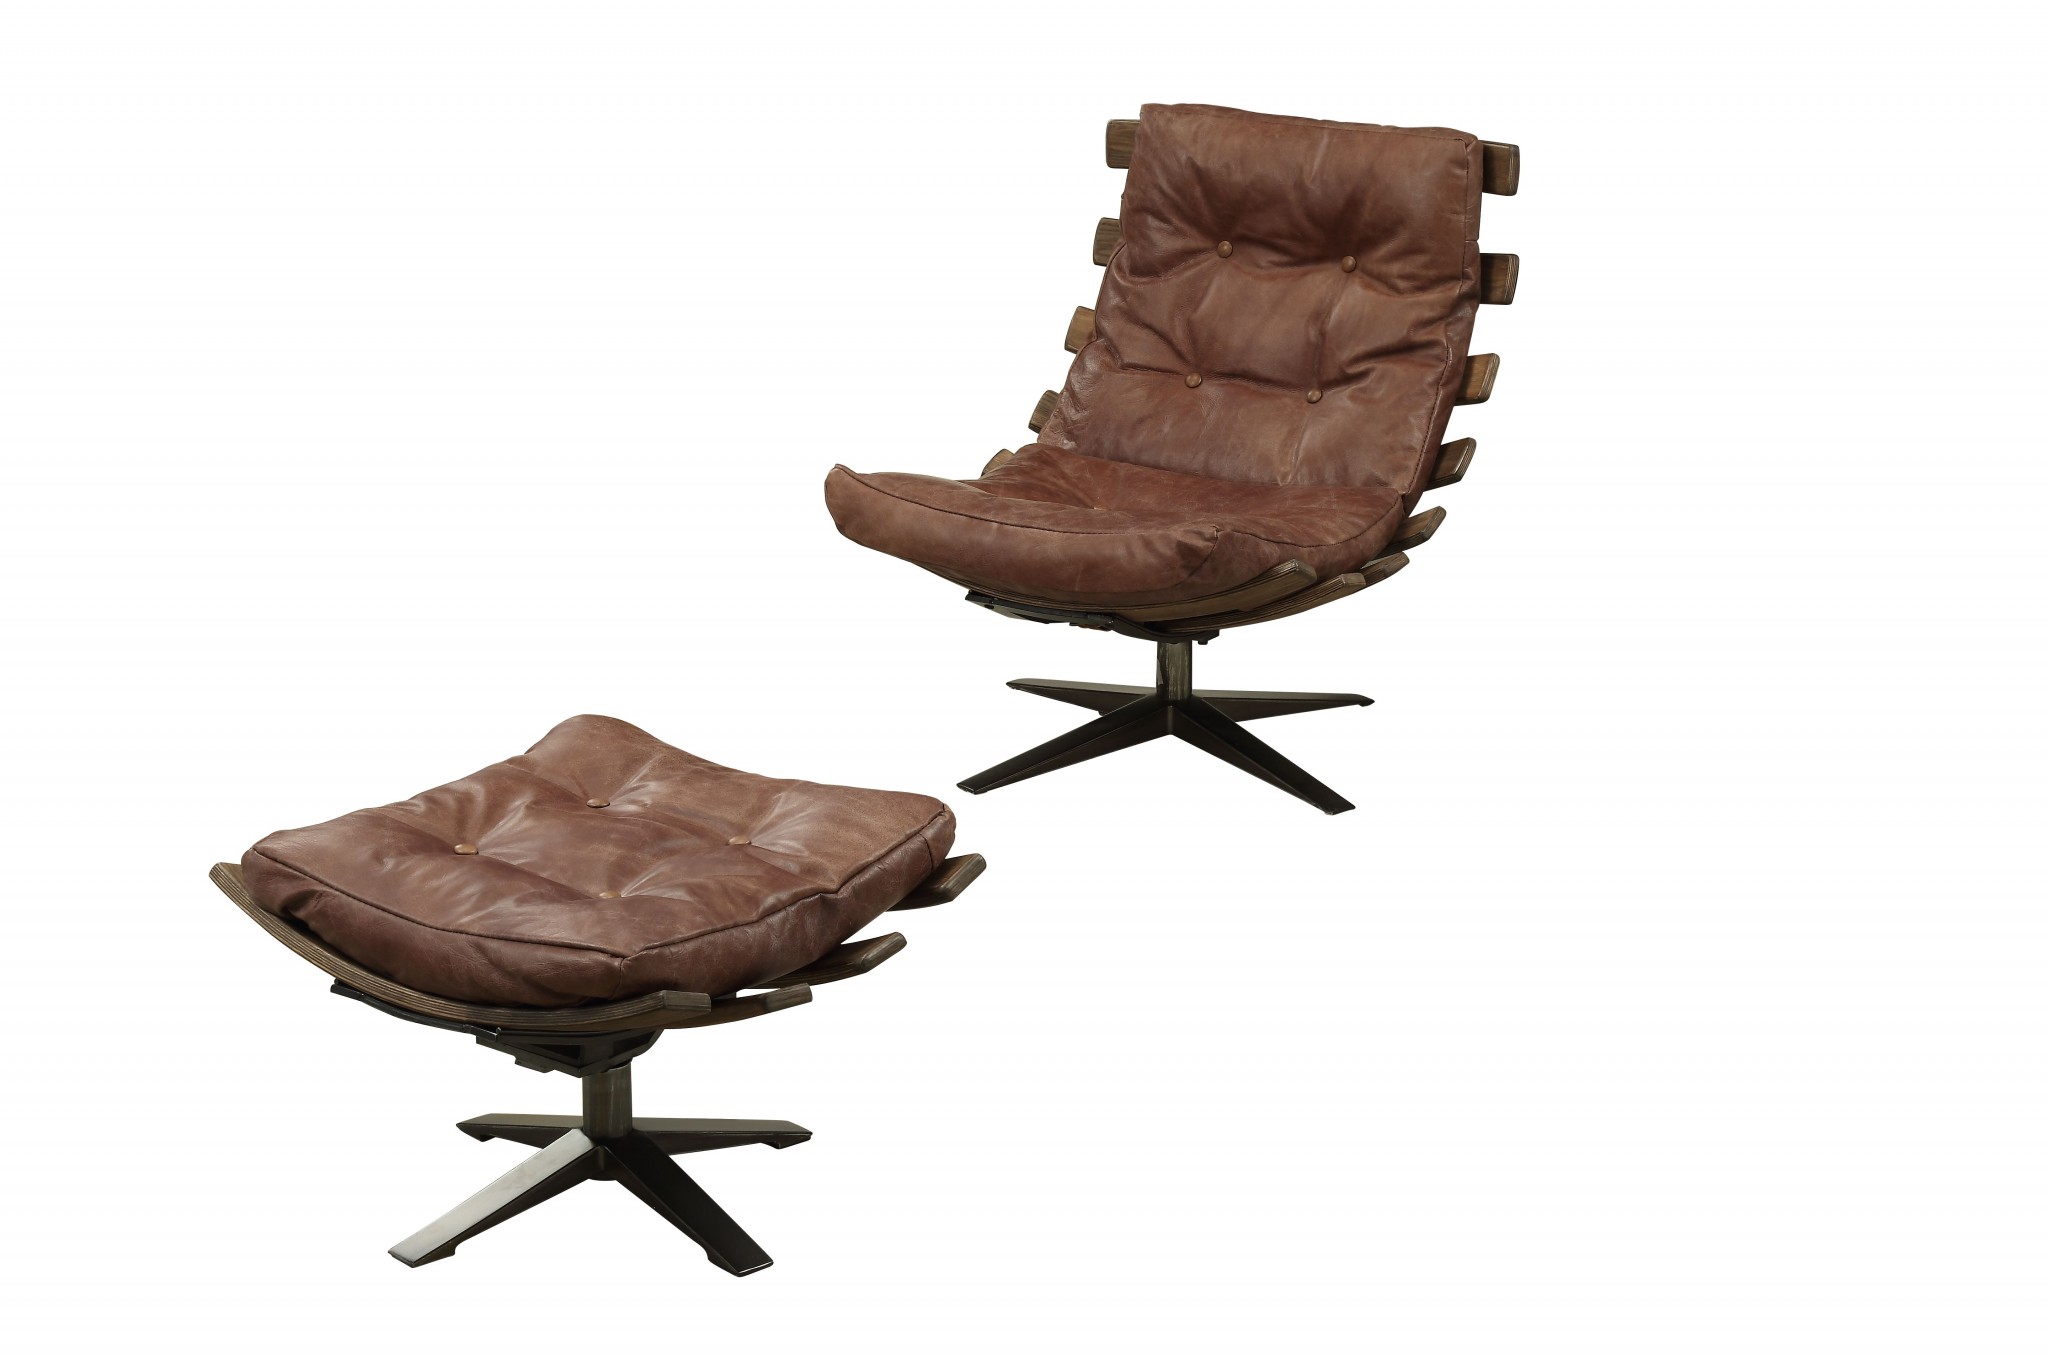 HomeRoots Furniture 27" X 35" X 33" 2Pc Retro Brown Top Grain Leather Chair And Ottoman